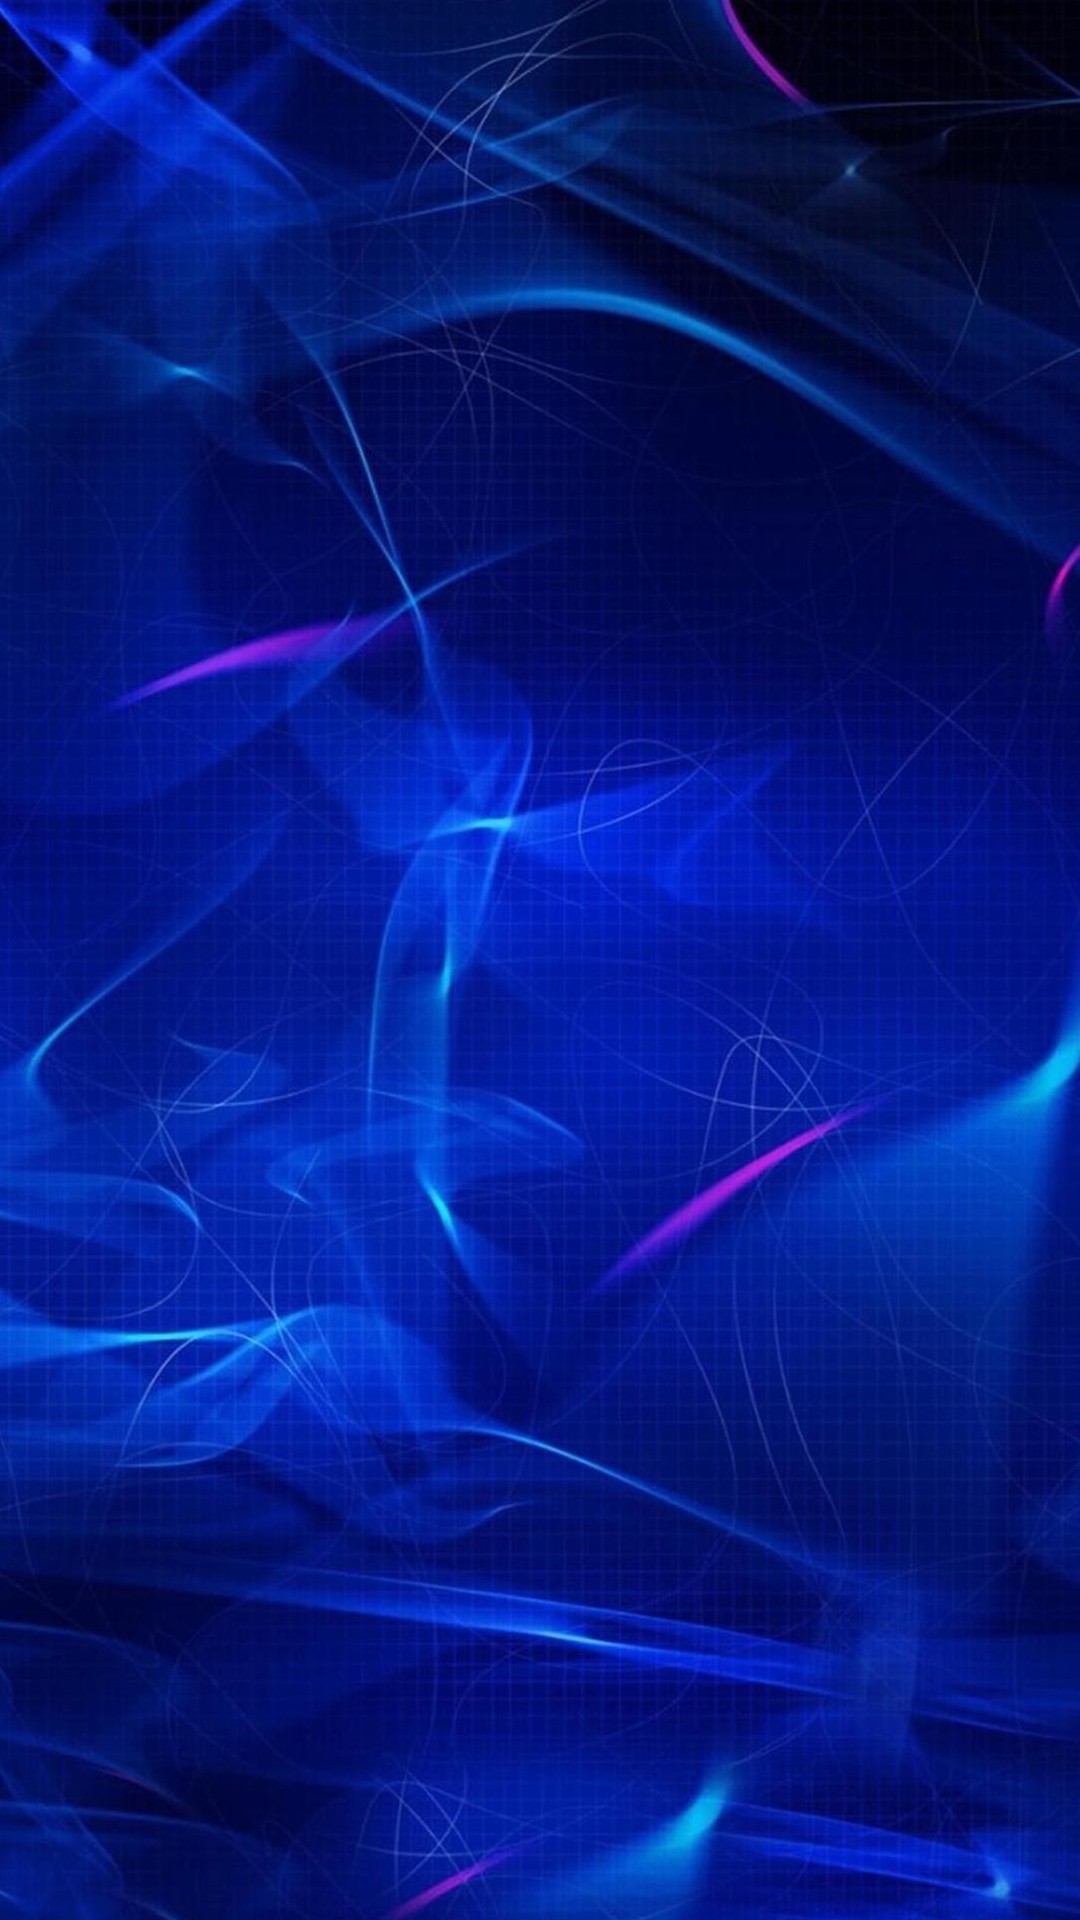 Abstract Xperia Z Wallpapers Hd 177 Xperia Z1 Zl Wallpapers And